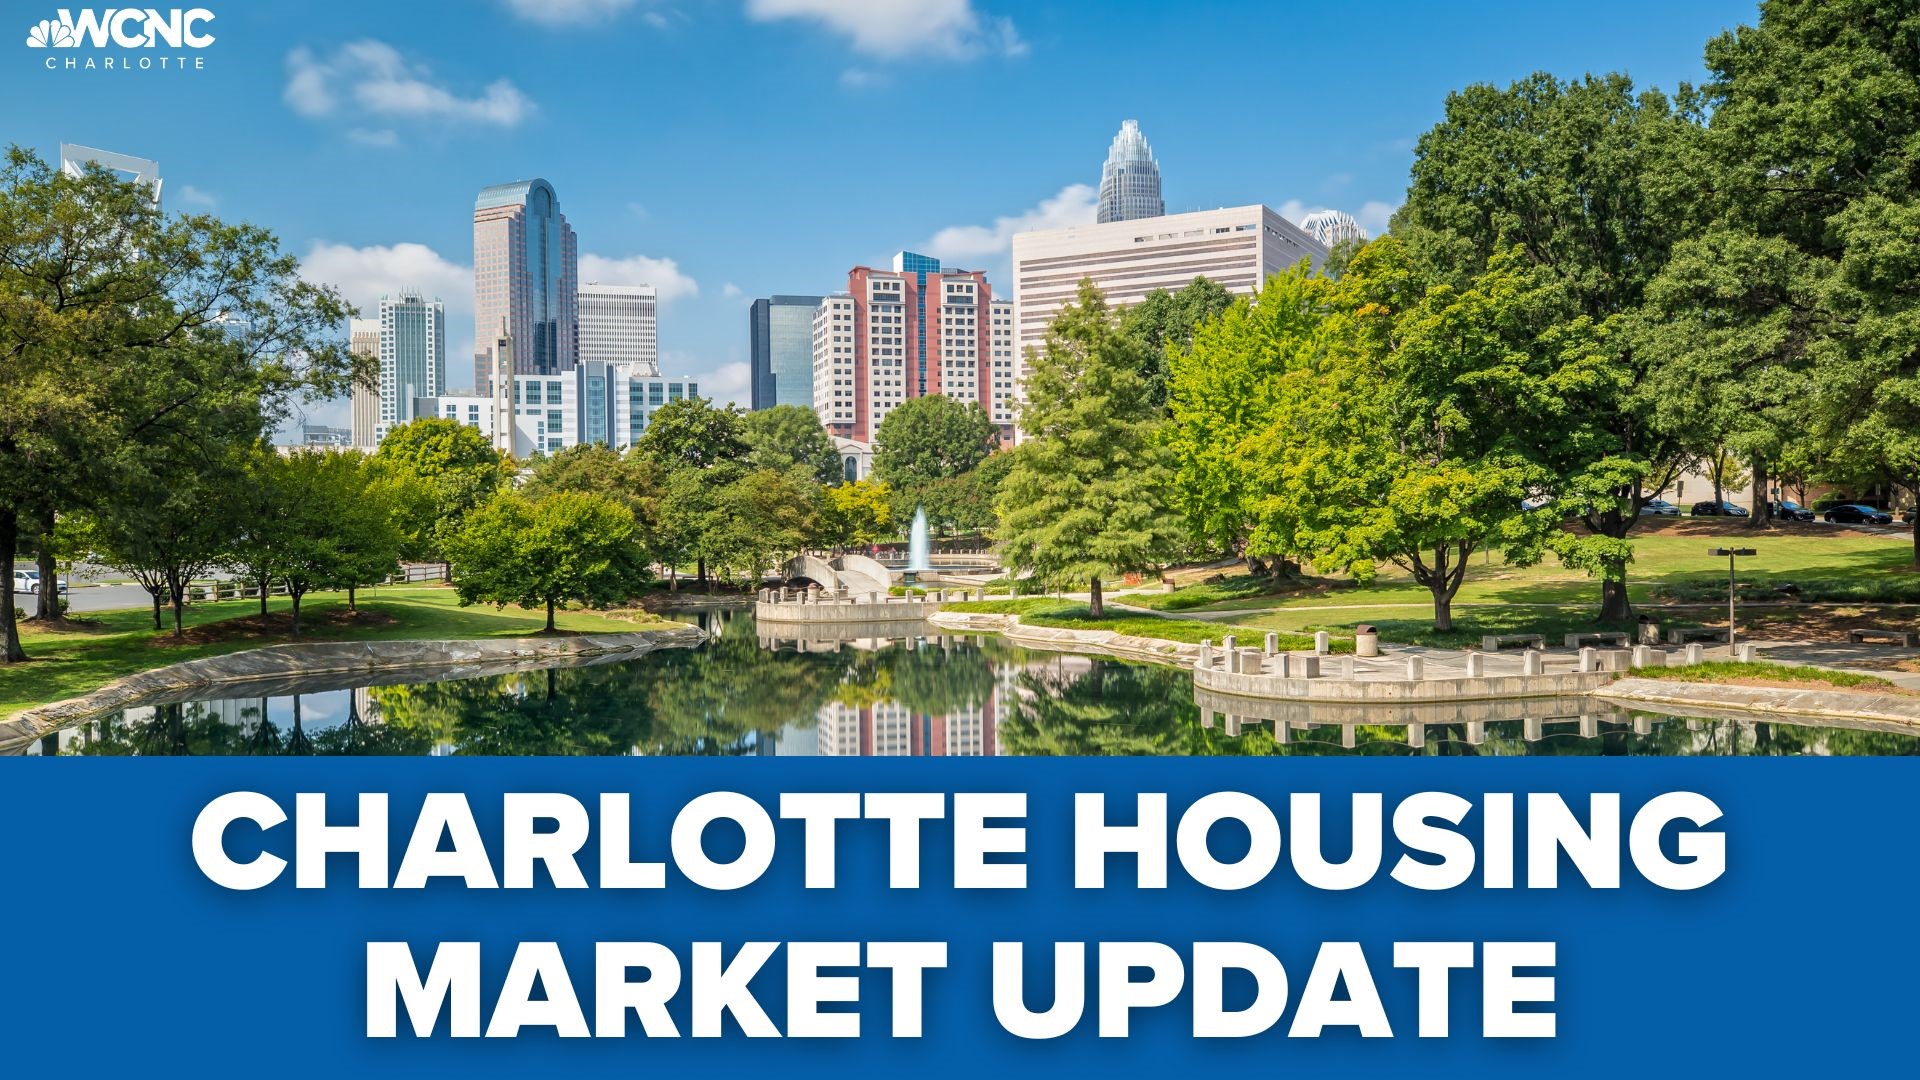 Real-estate marketplace company Zillow said the Queen City will be the nation's hottest housing market in 2023.